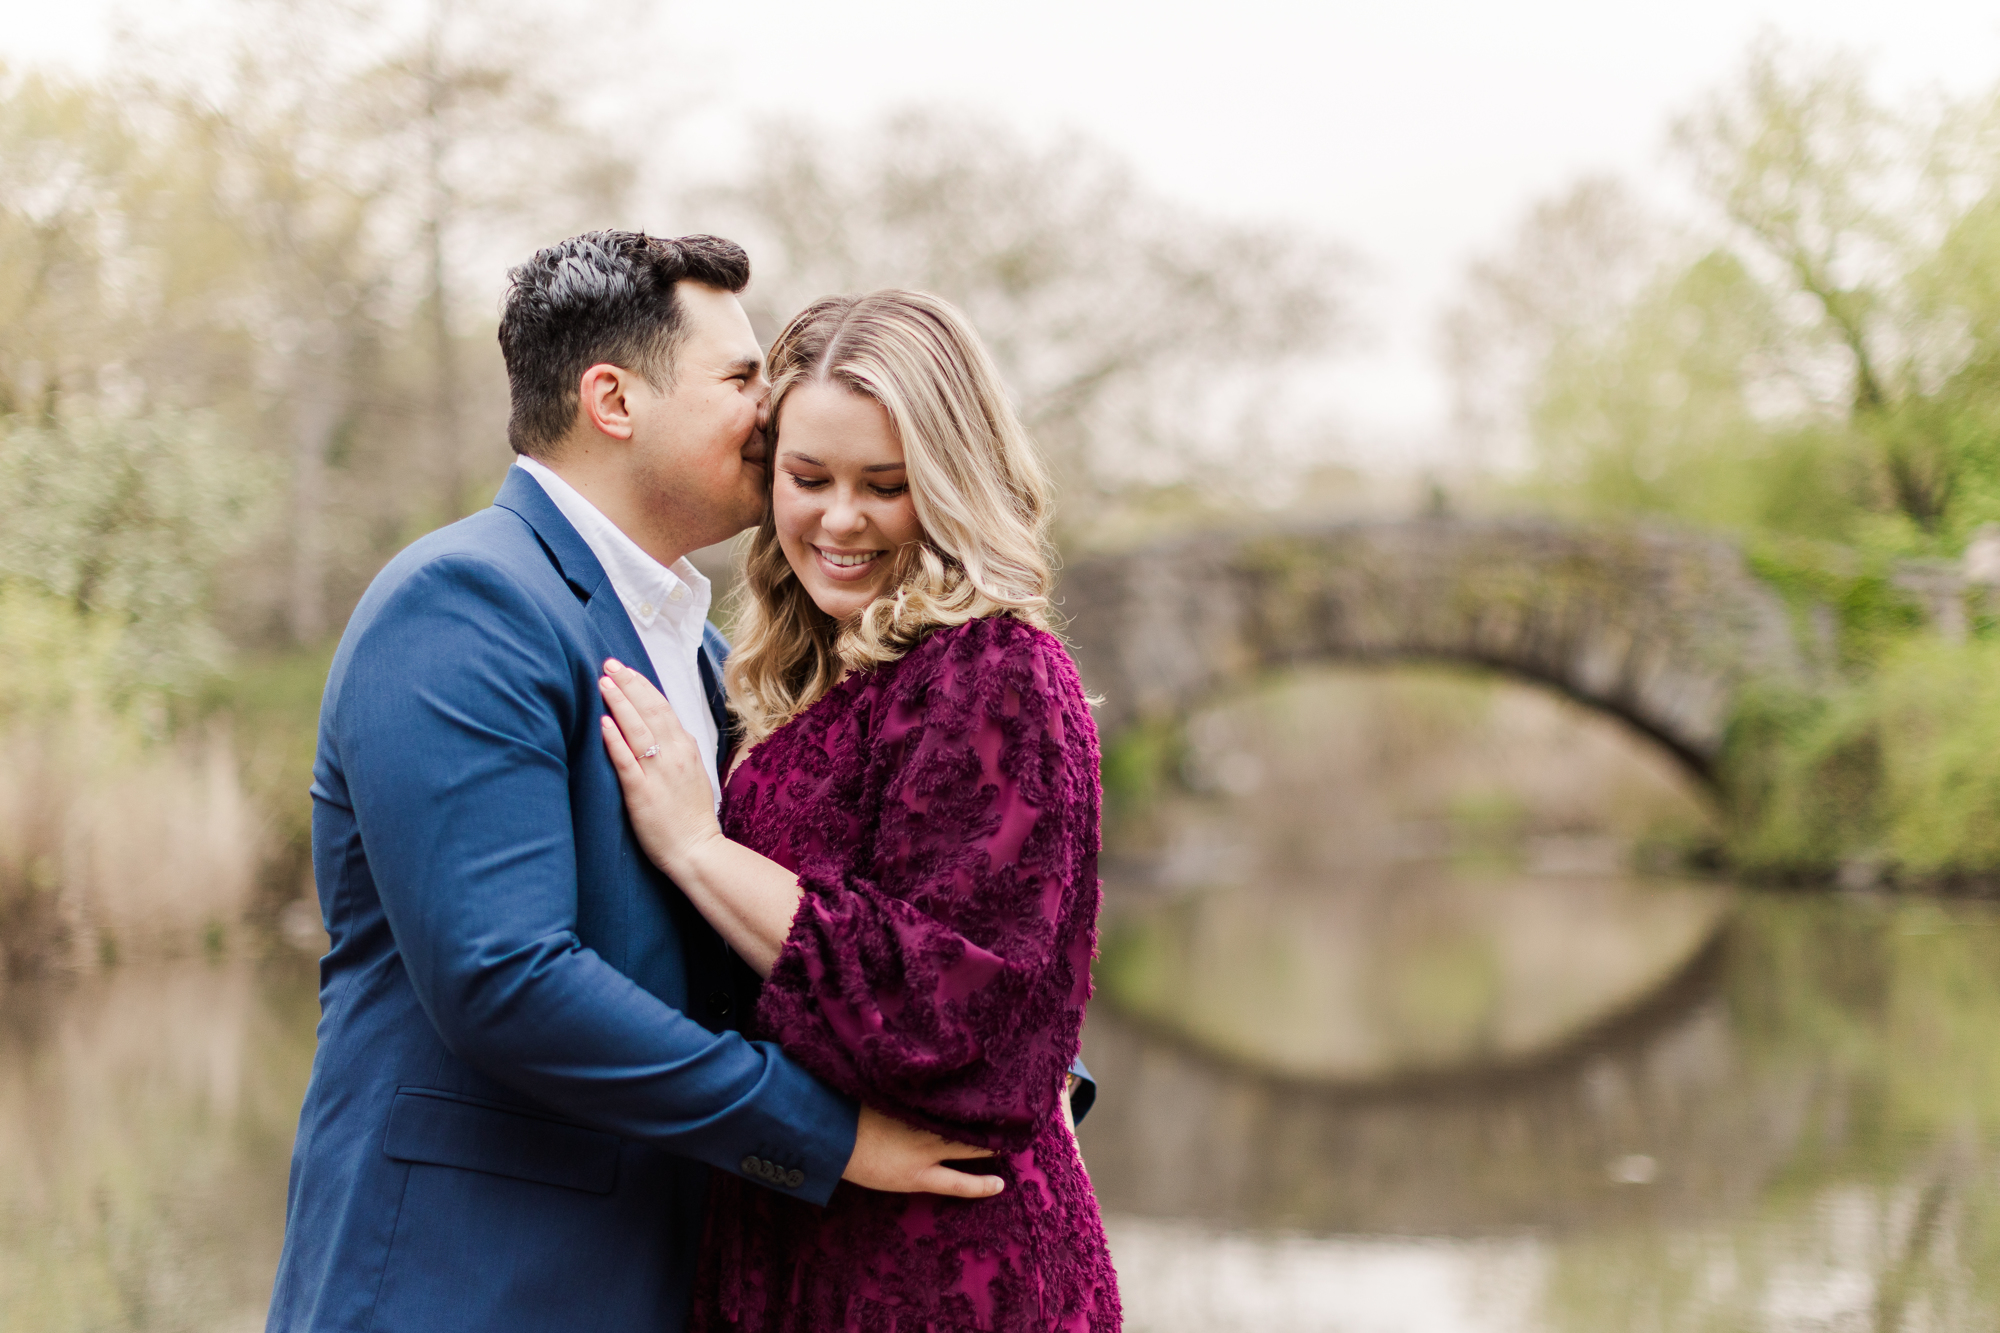 Lovely Engagement Pictures in Central Park